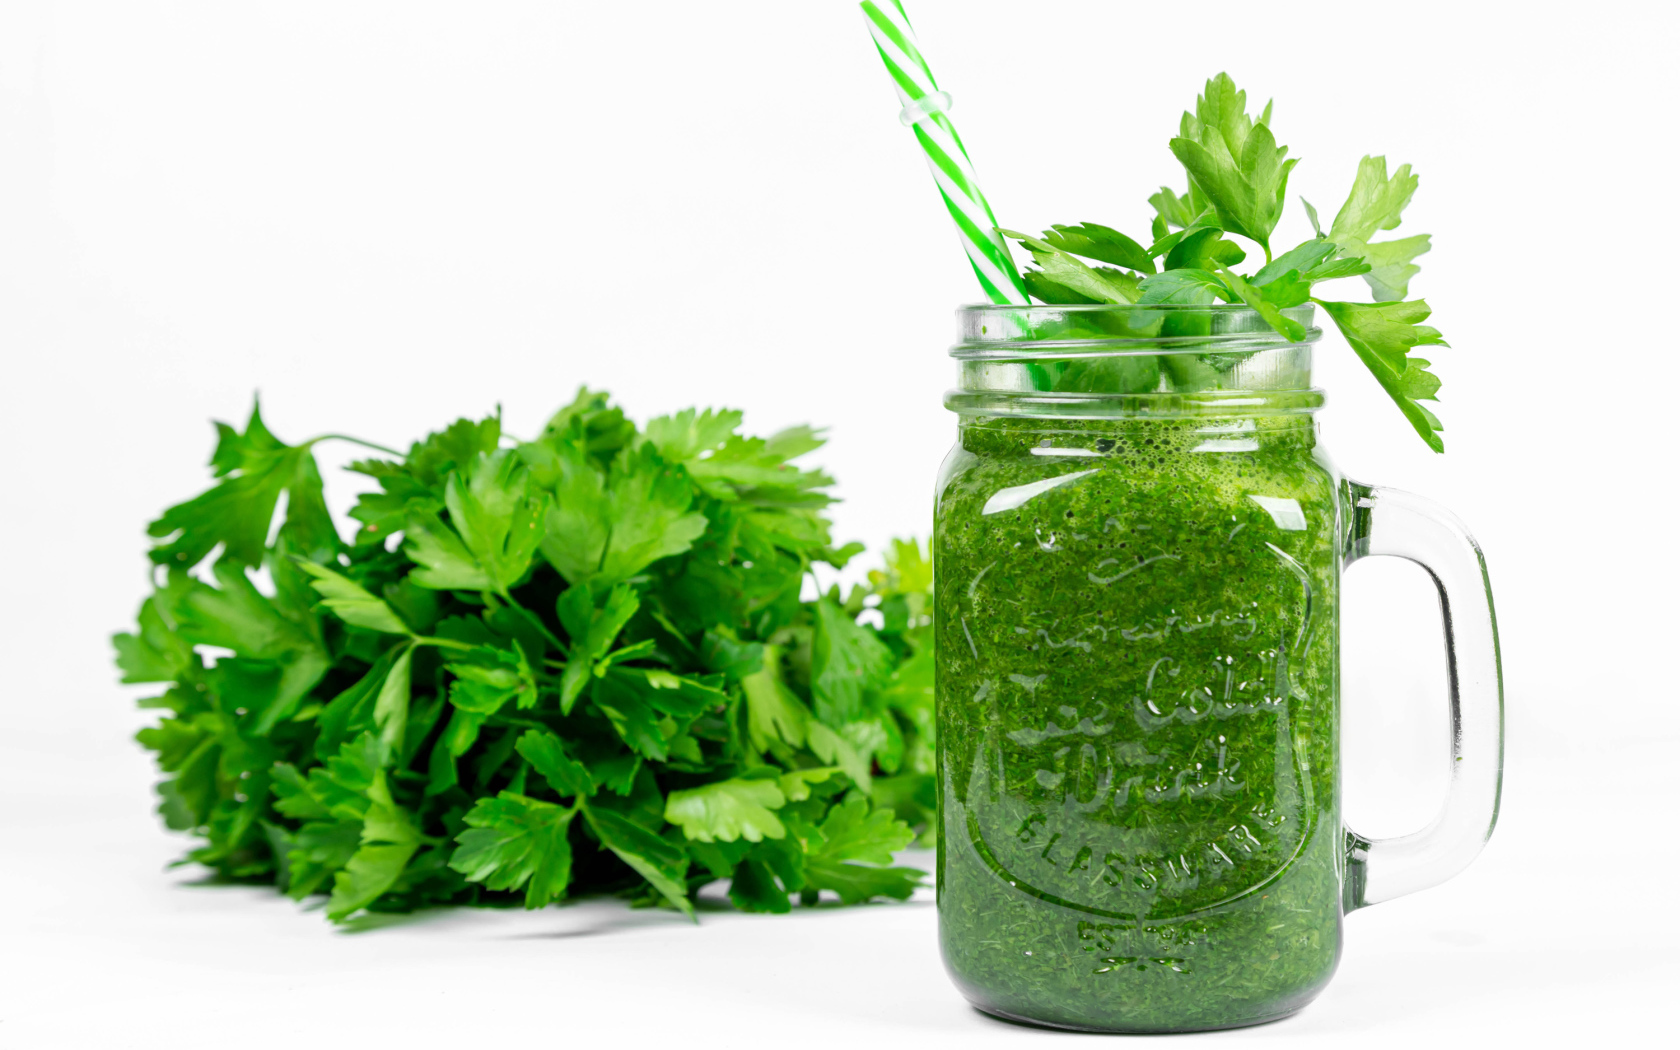 Green smoothie on the table with parsley